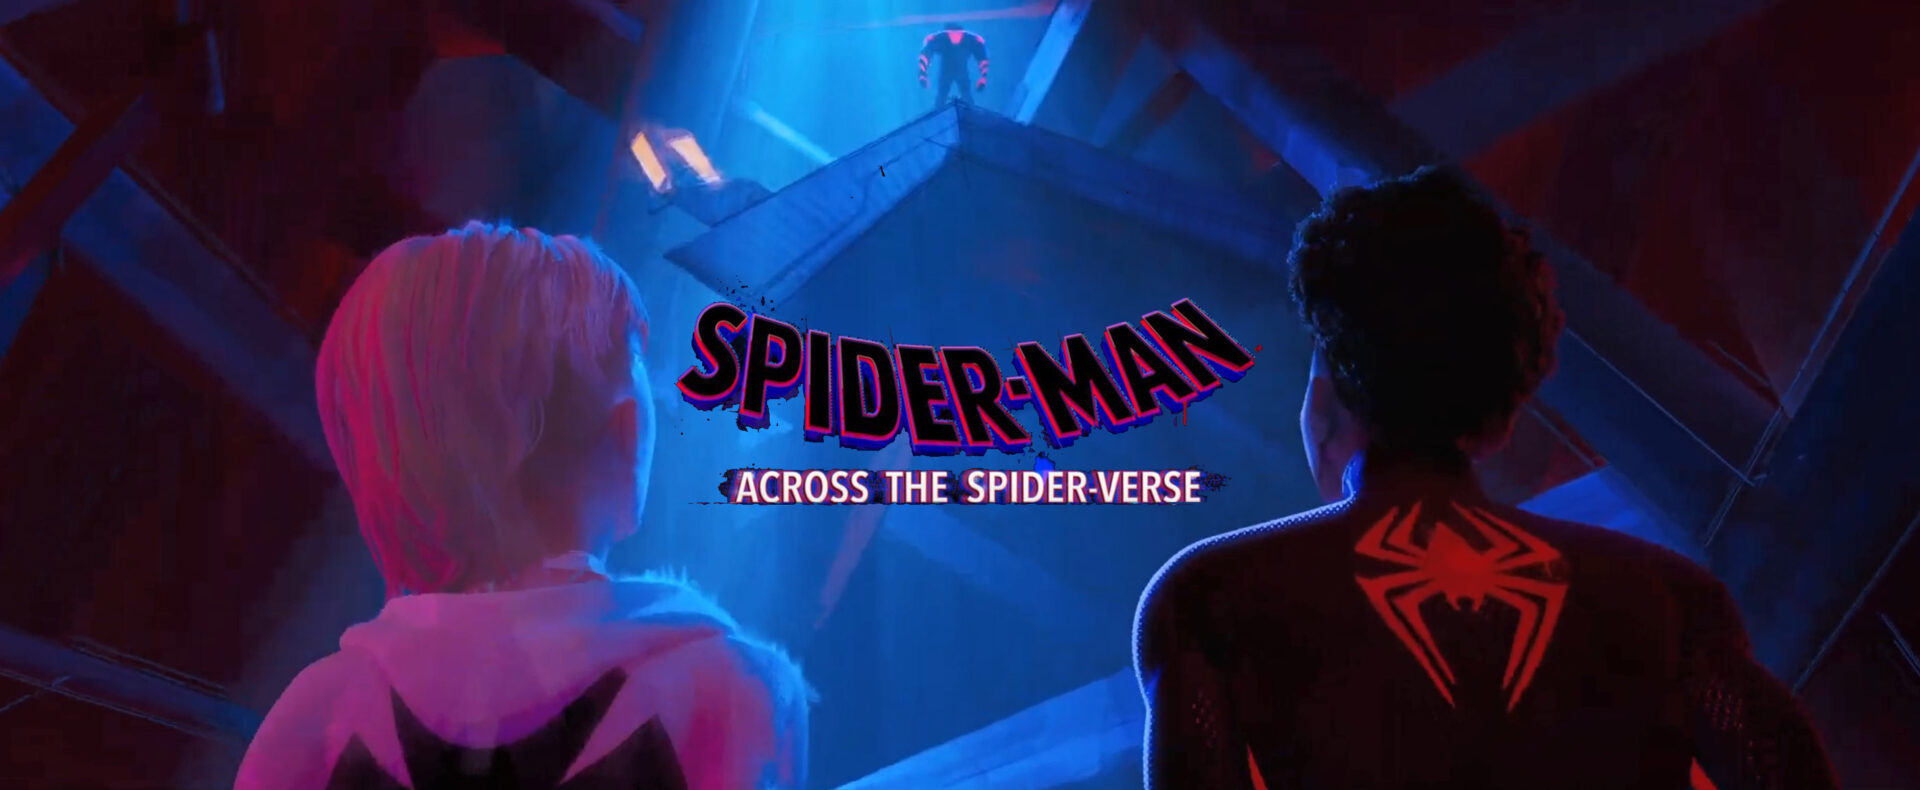 across the spiderverse theatrical trailer 1 banner